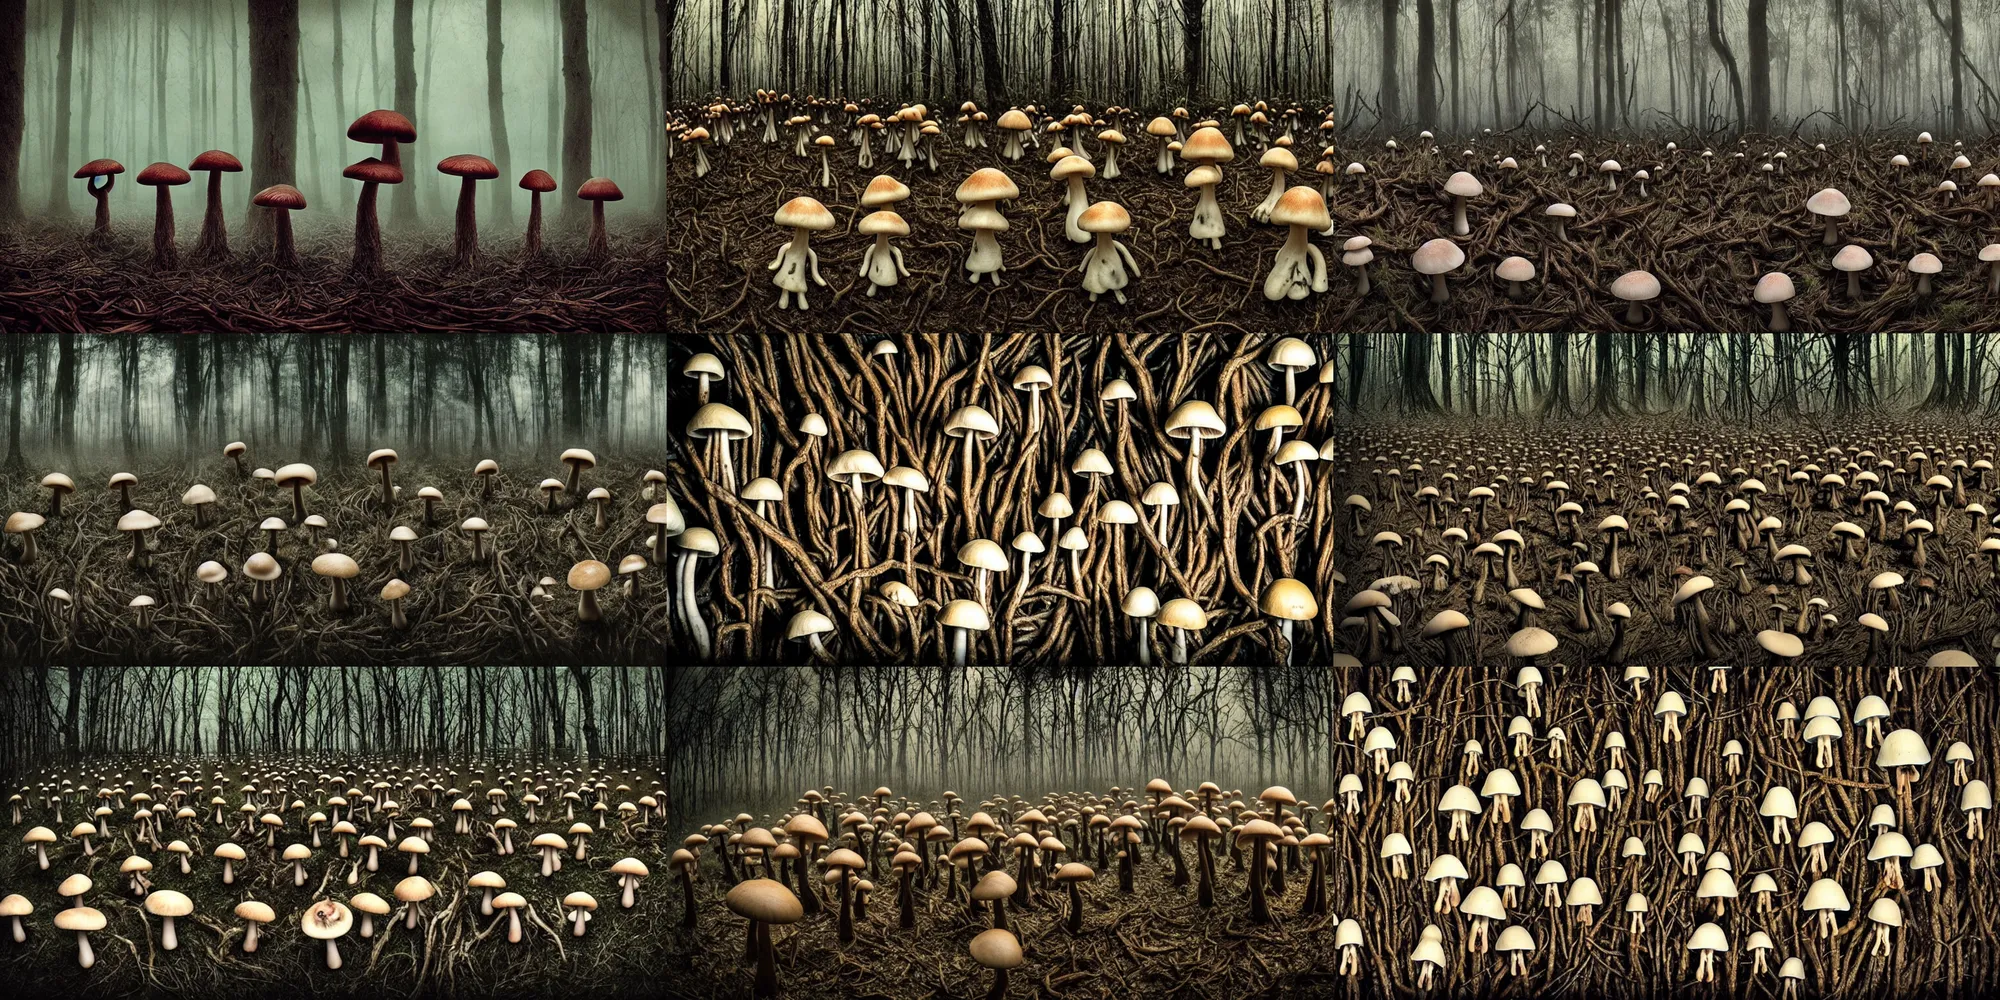 Prompt: terrifying cursed mushroom children made of twigs, faces made of bark, disturbing expired old polaroid photograph, creepy haunted mushroom forest, eerie, foggy, pans labyrinth, by hideo kojima, hiroya oku, junji ito, deep aesthetics, silent hill, fisheye lens, low quality